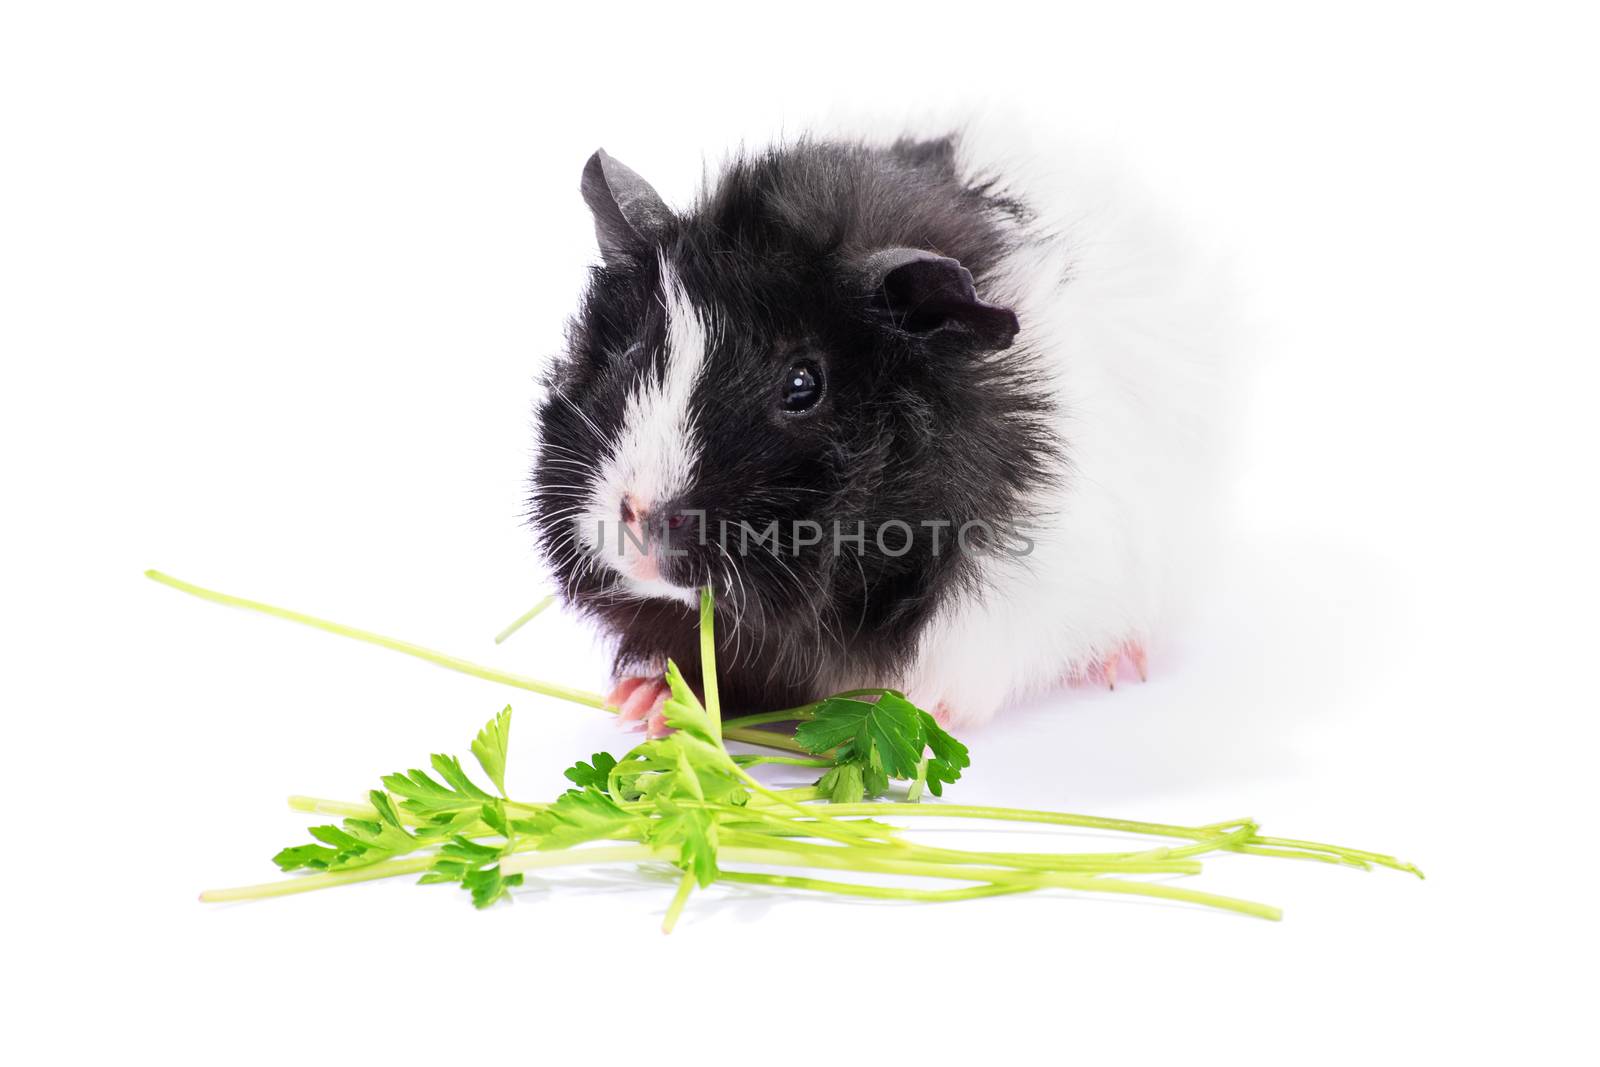 Cute black and white guinea pig eating parsley, isolated on white background.